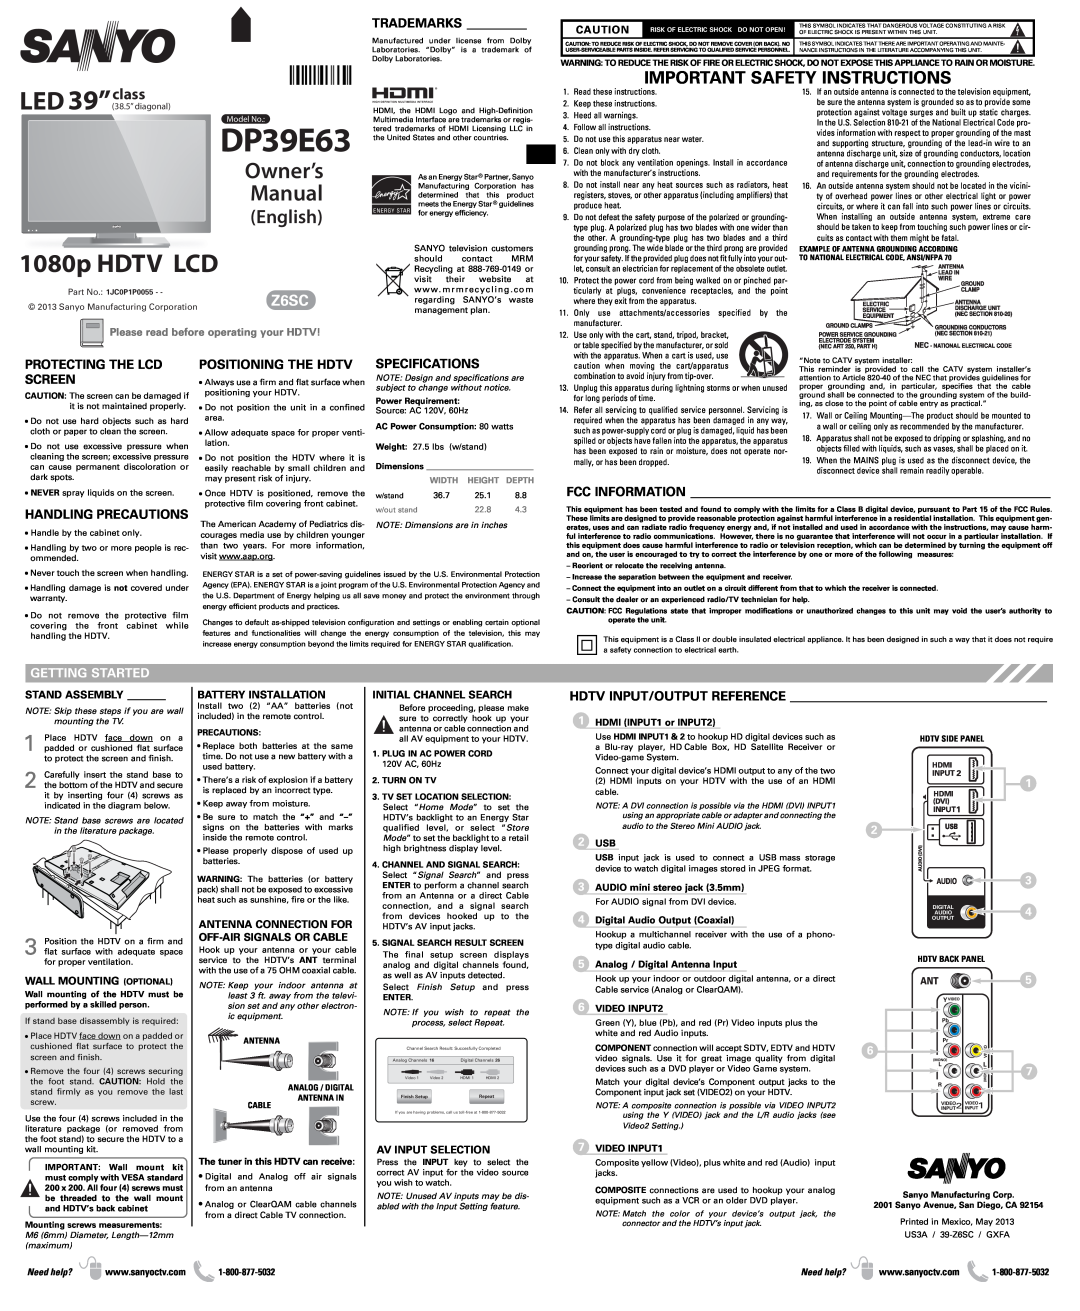 Sanyo DP39E63 important safety instructions Getting Started, 1080p HDTV LCD, Owner’s Manual, English, LED class, Z6SC 